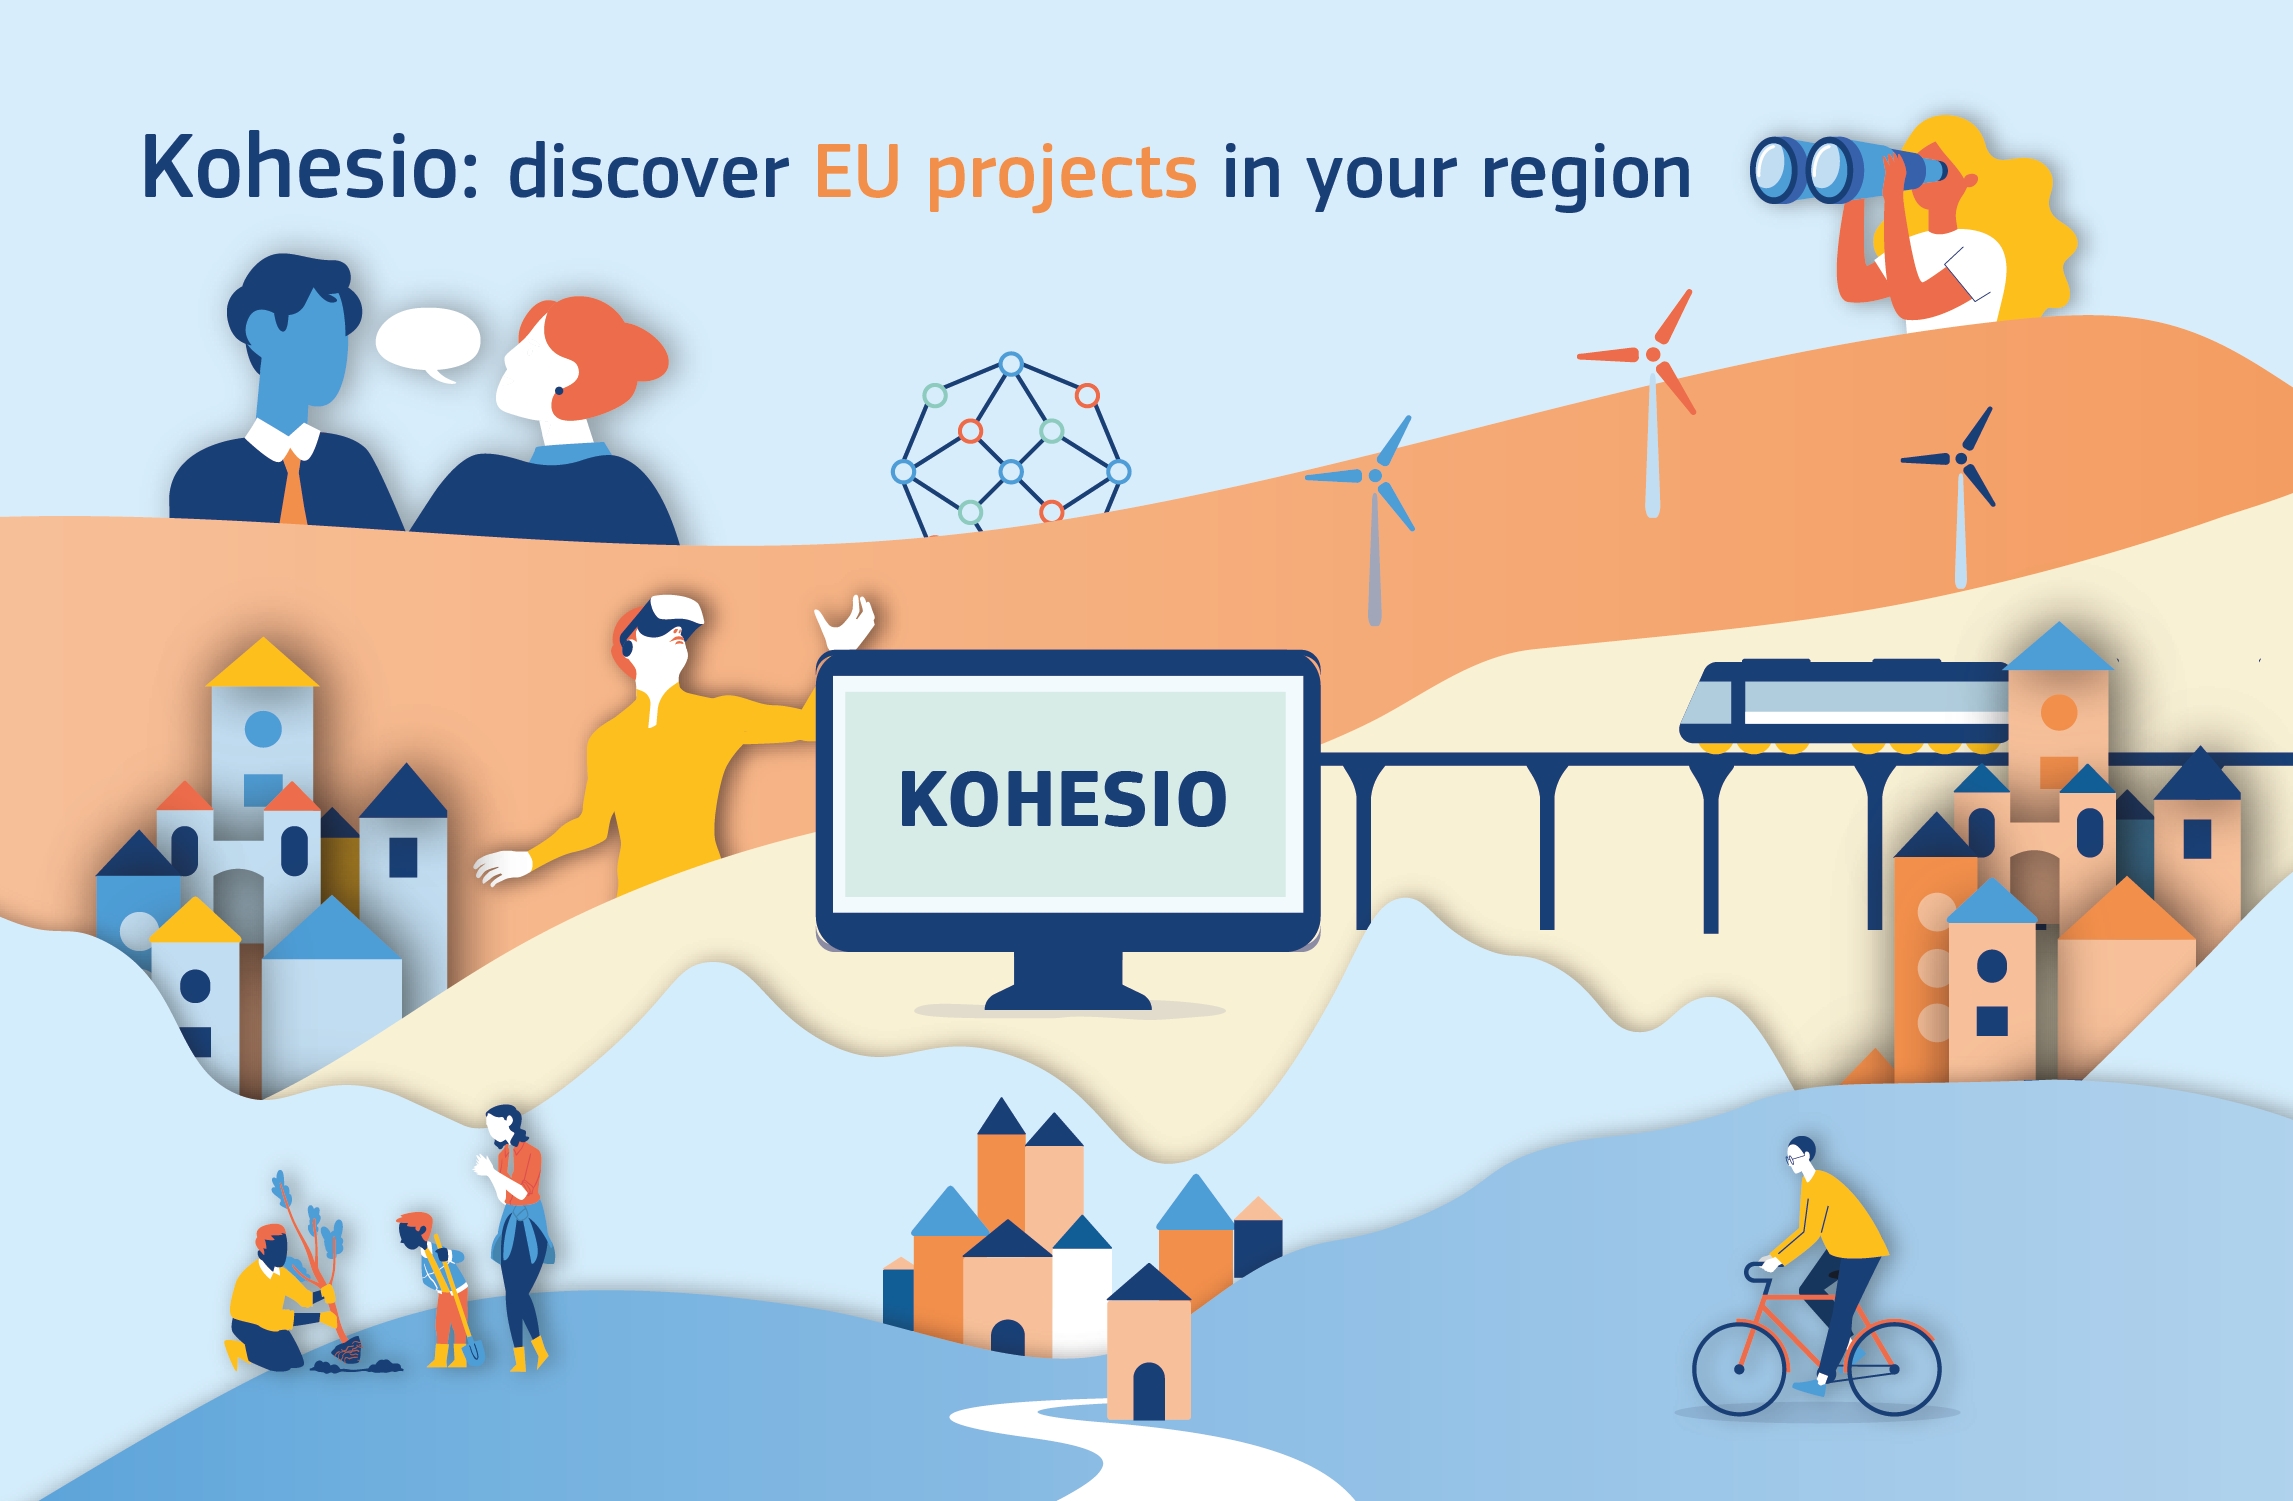 Kohesio promotes visibility and transparency of Cohesion funding